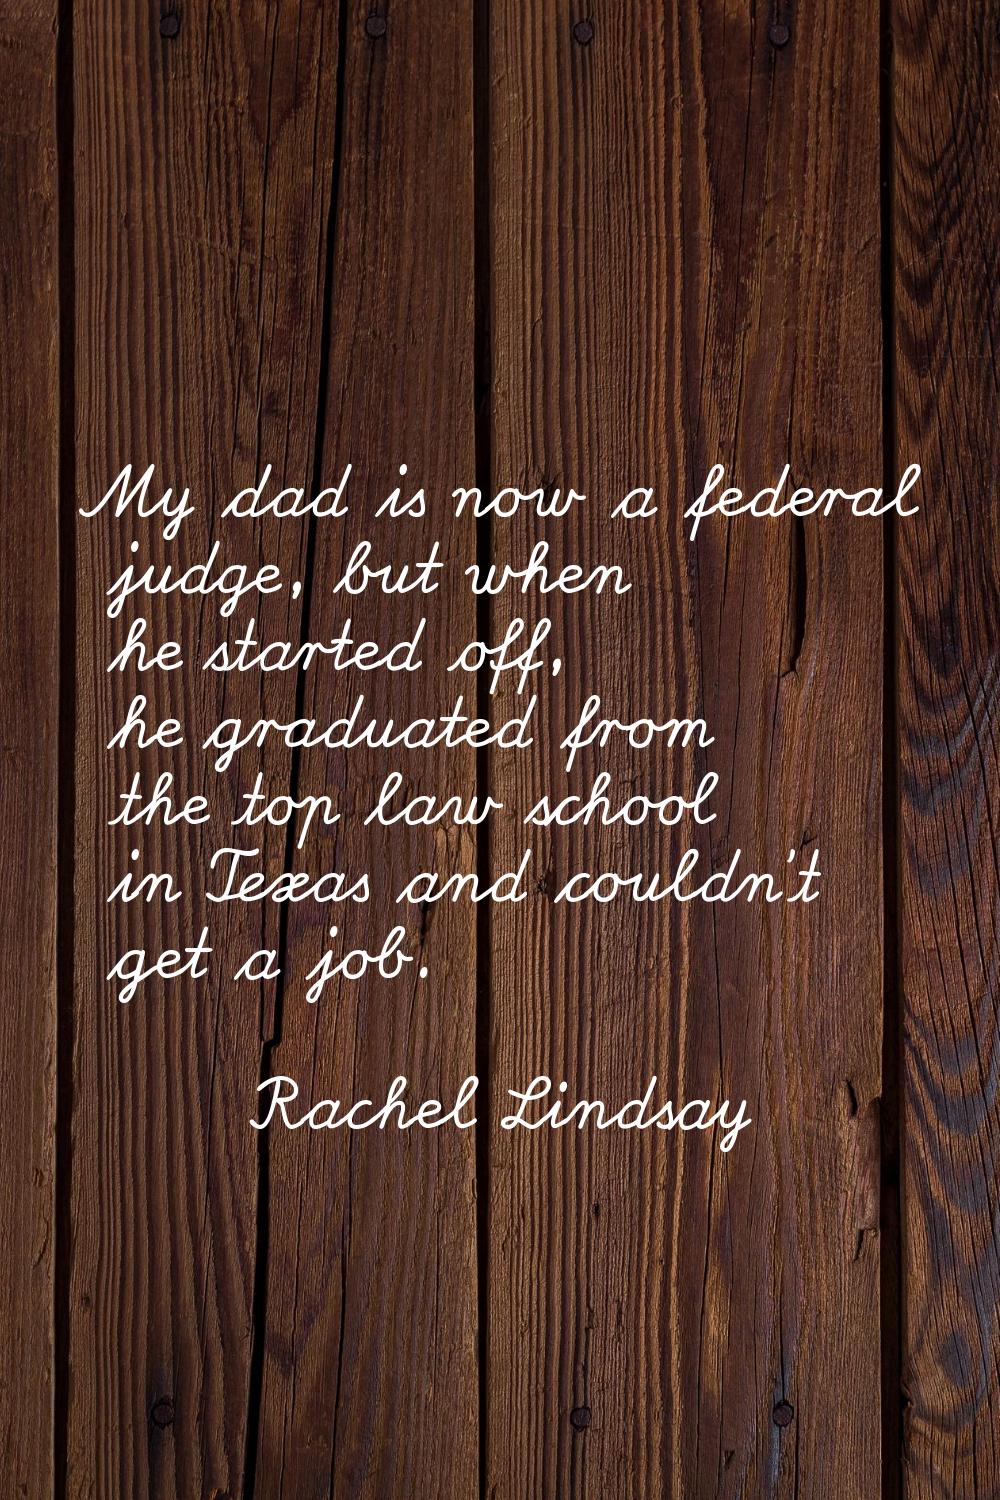 My dad is now a federal judge, but when he started off, he graduated from the top law school in Tex